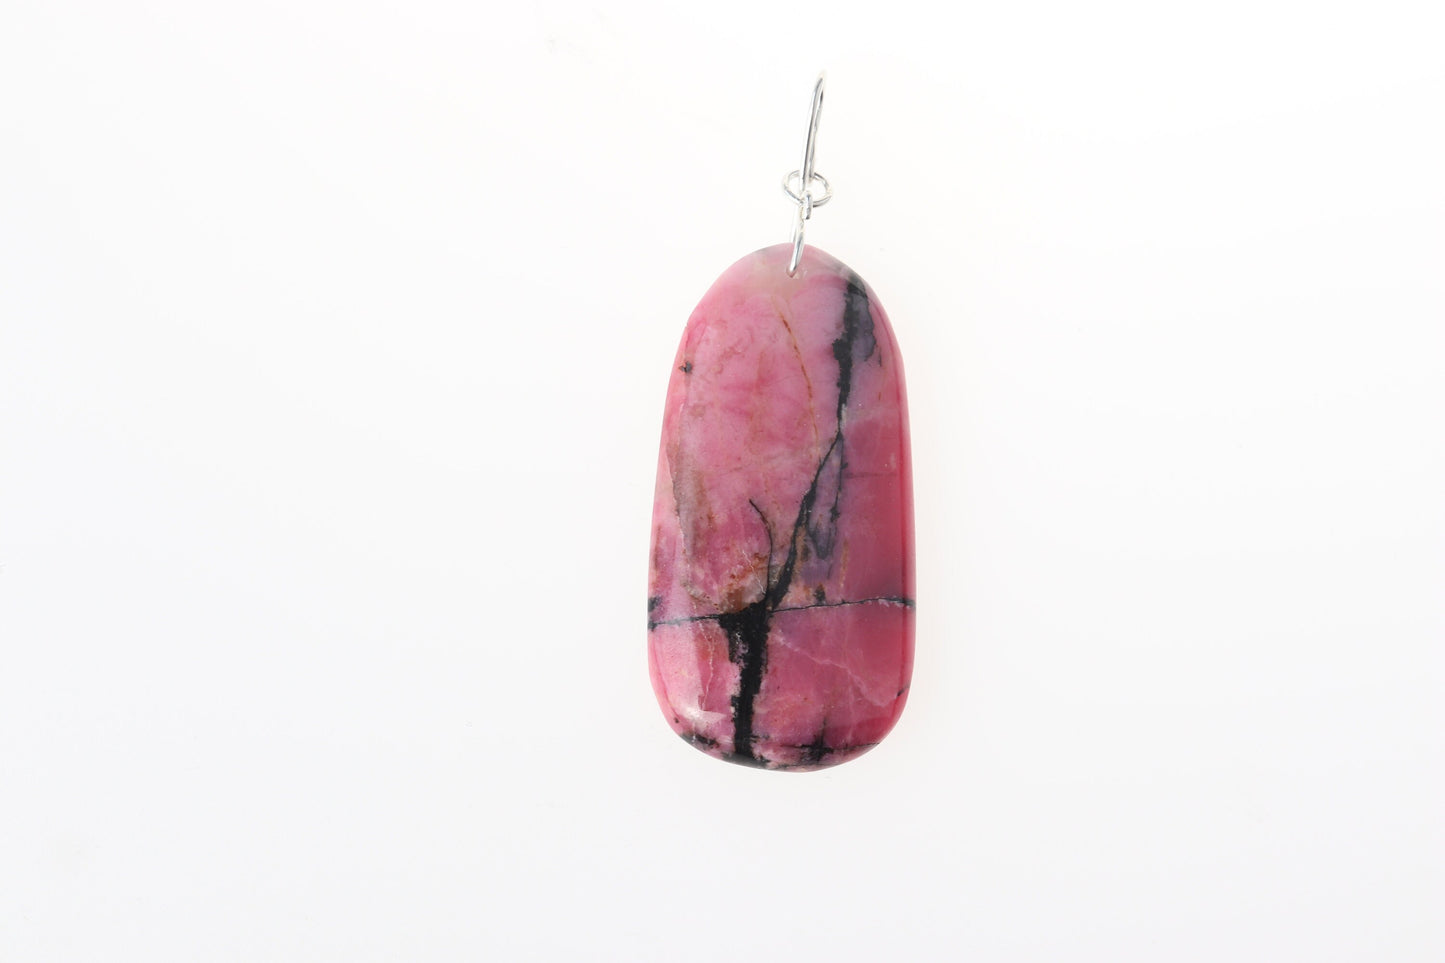 Rhodonite Crystal Pendant, Handcut and Polished in USA with infinity bow silver bail, USA made